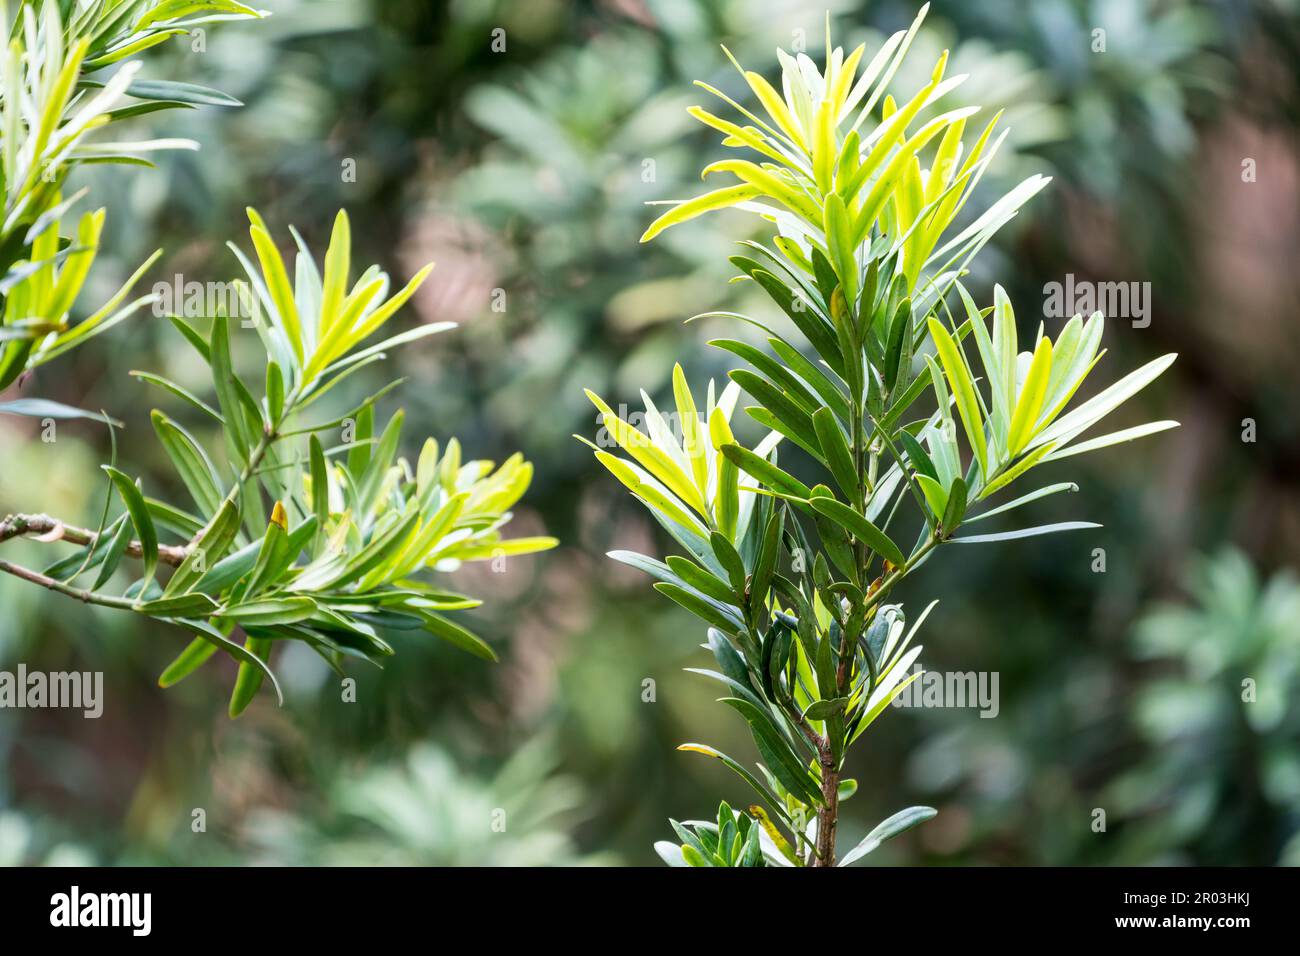 Podocarpus latifolius or Drakensberg Yellowwood young leaves closeup as abstract nature background or concept gardening and horticulture South Africa Stock Photo